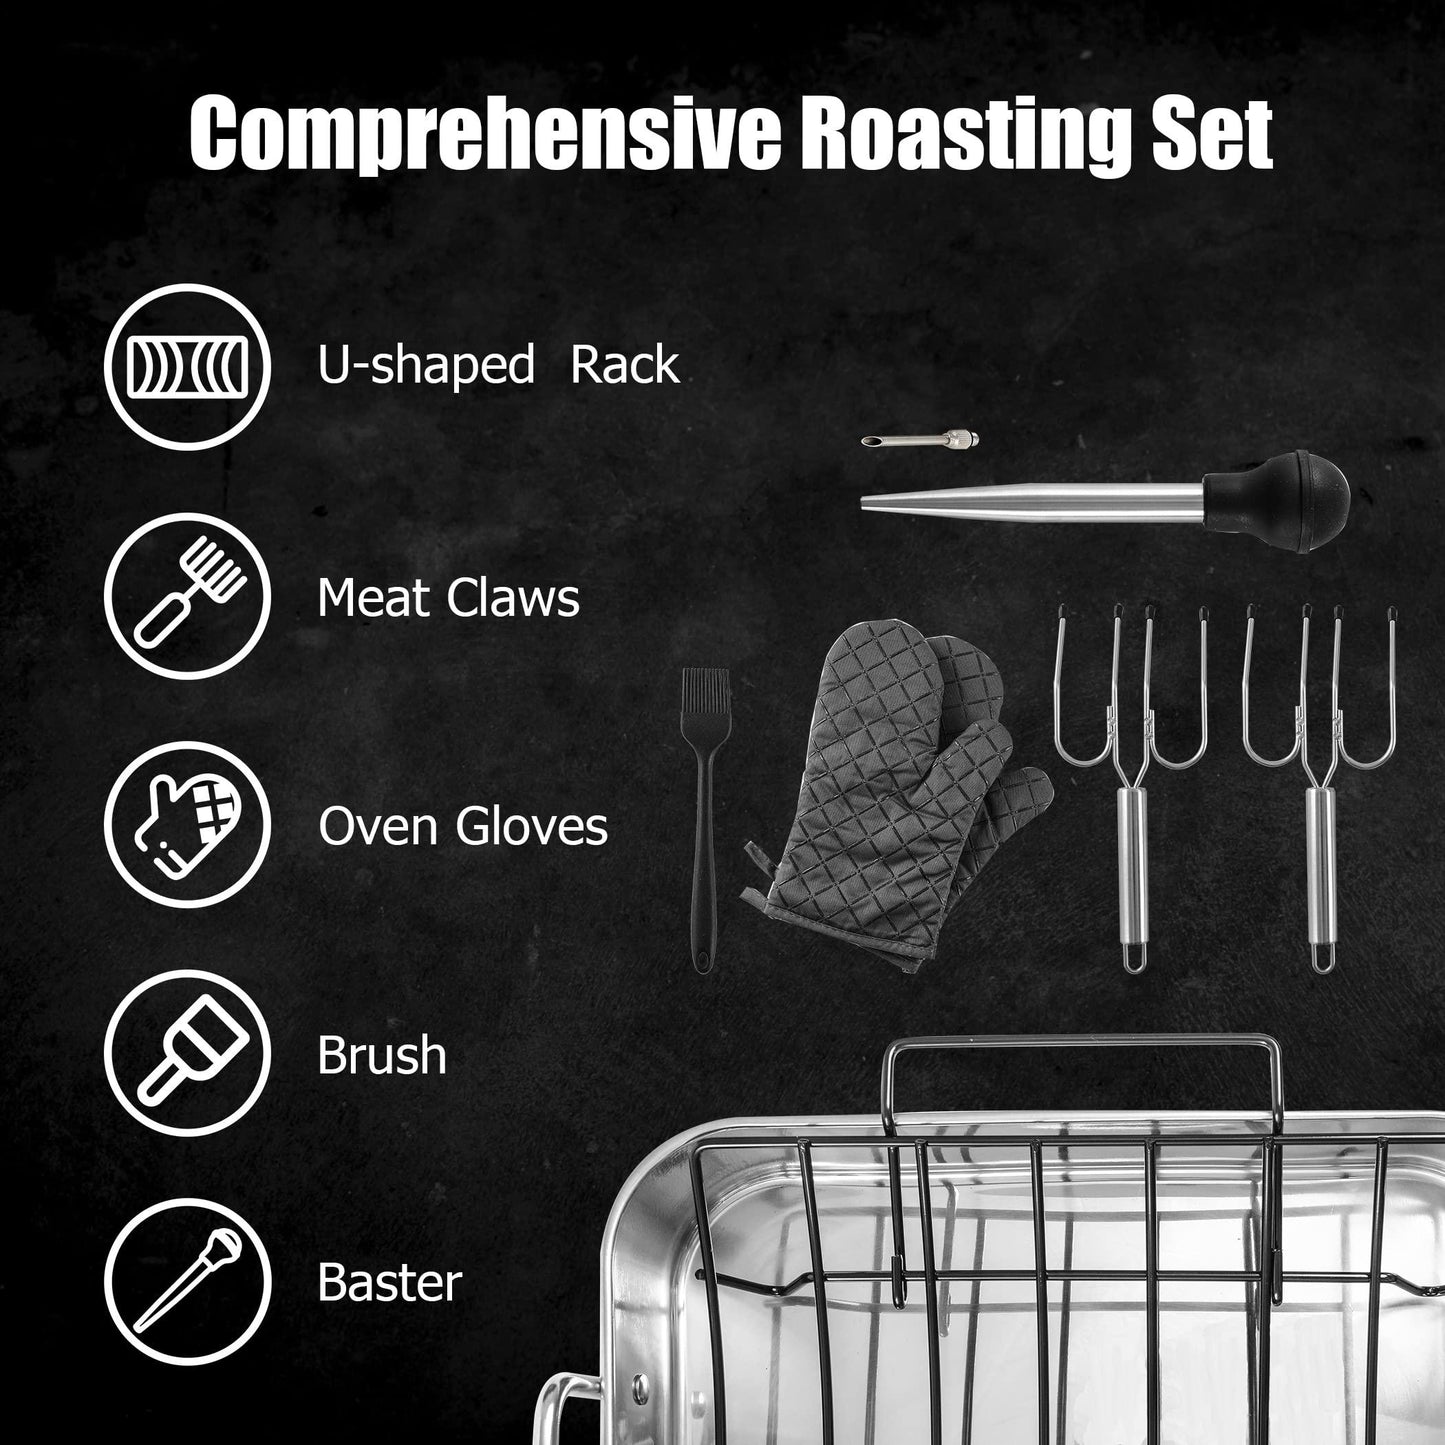 Kaiihome Roasting Pan with Nonstick Rack - 16 inch Stainless Steel Rectangular Turkey Pan with Non-stick U-Shaped Rack, Turkey Roaster Pan for Thanksgiving Party - CookCave